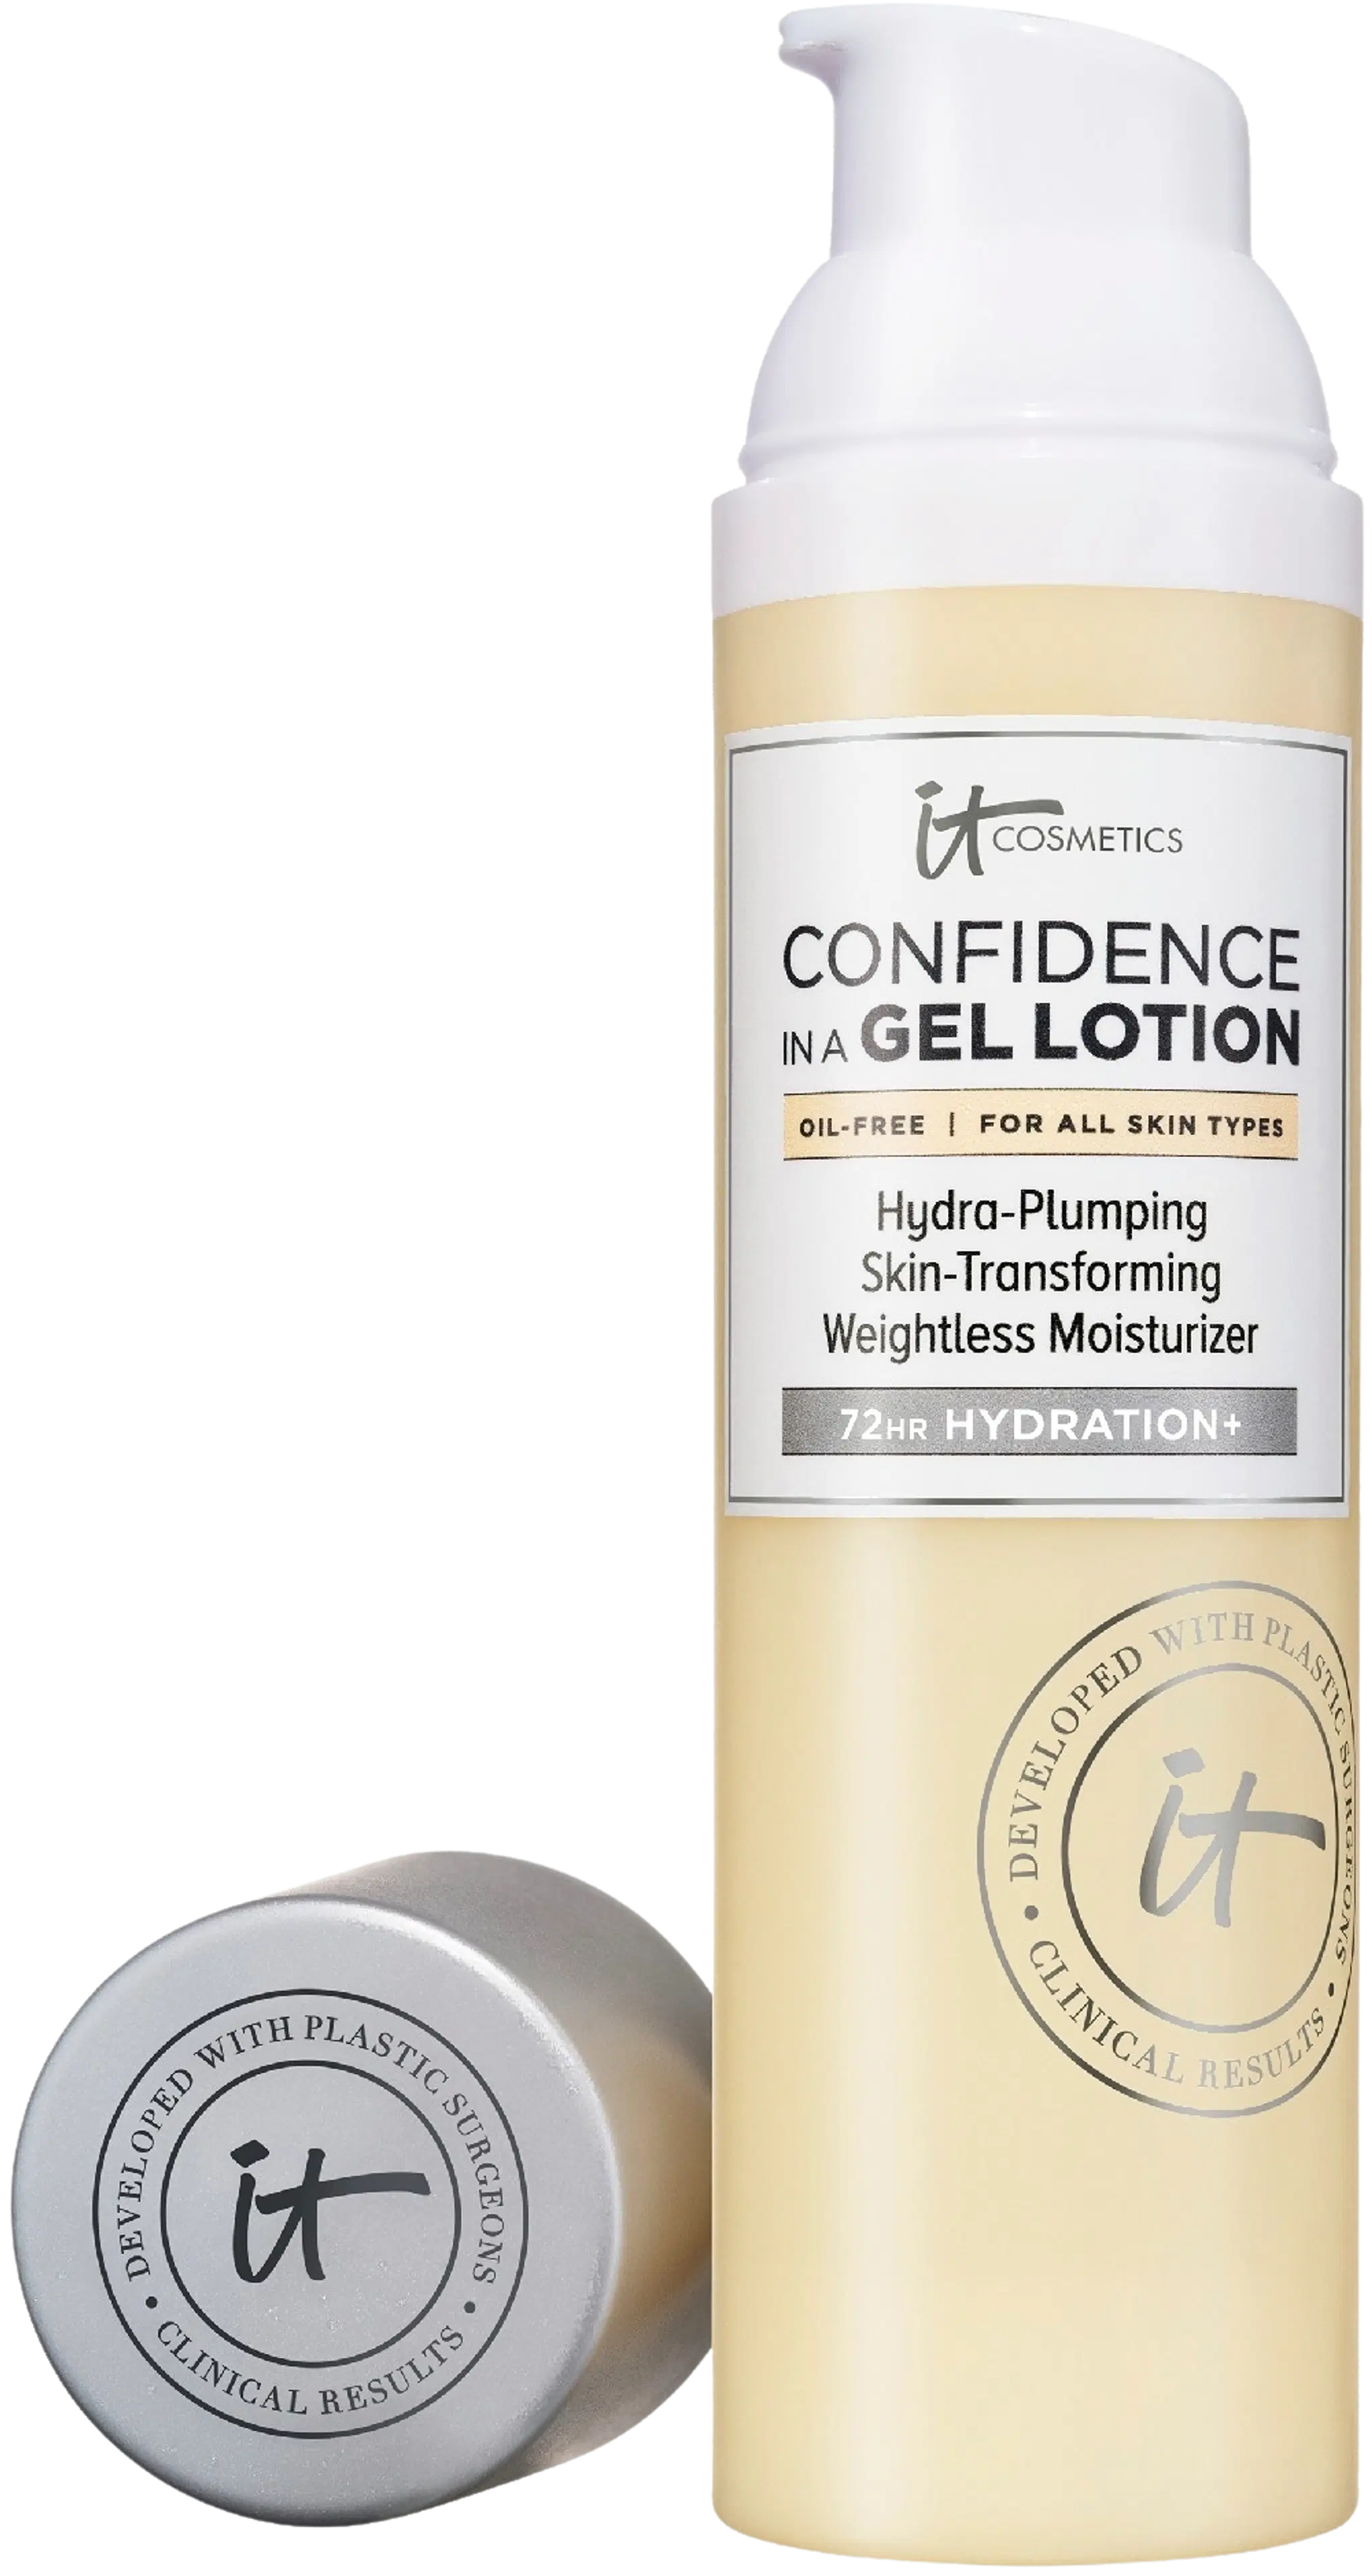 It Cosmetics Confidence in a gel lotion geelivoide kasvoille 130 g